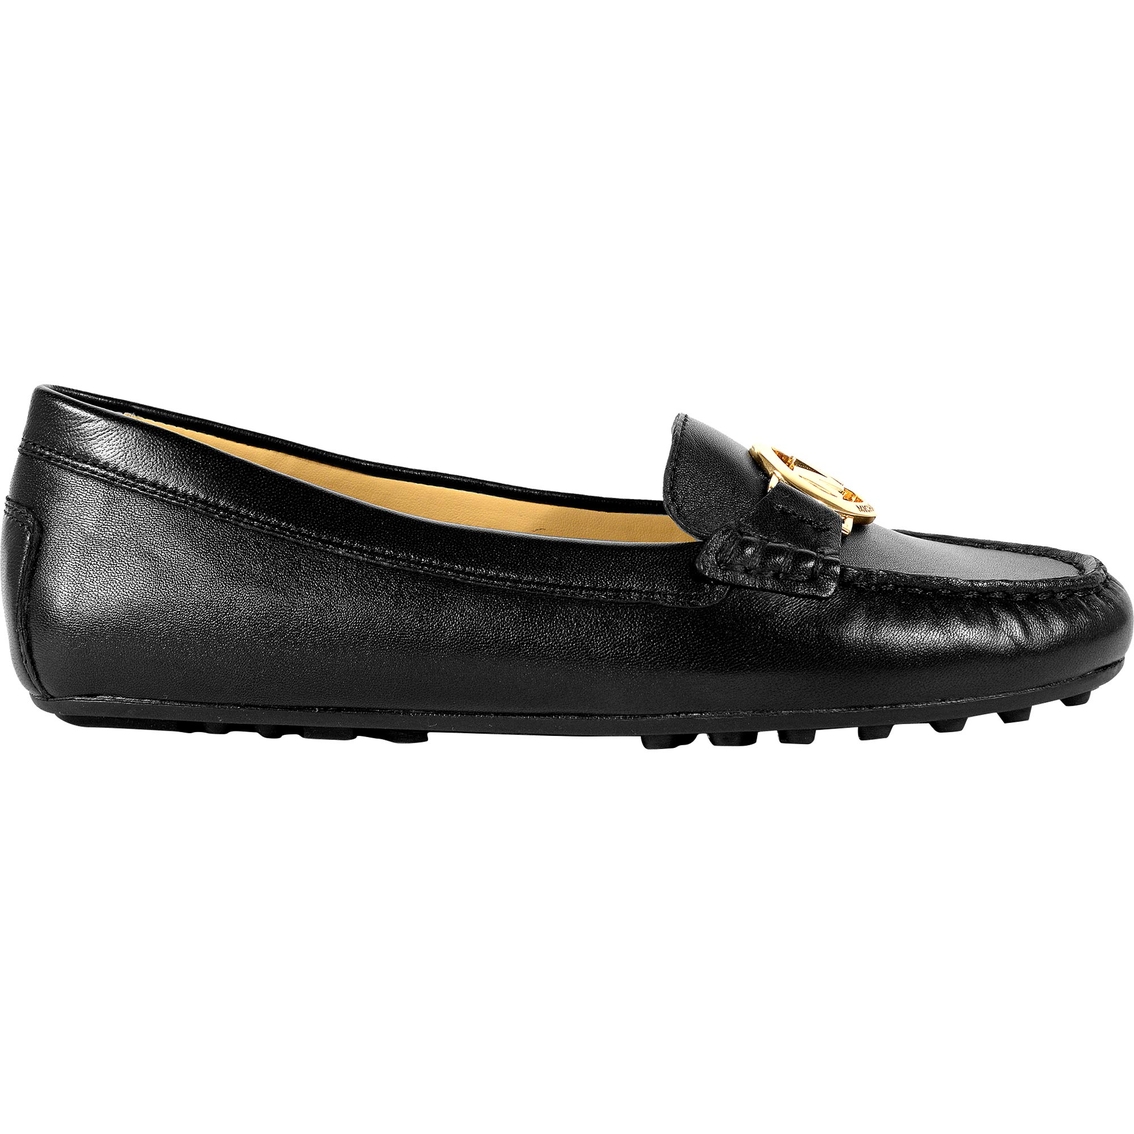 Michael Kors Molly Loafer - Image 2 of 3